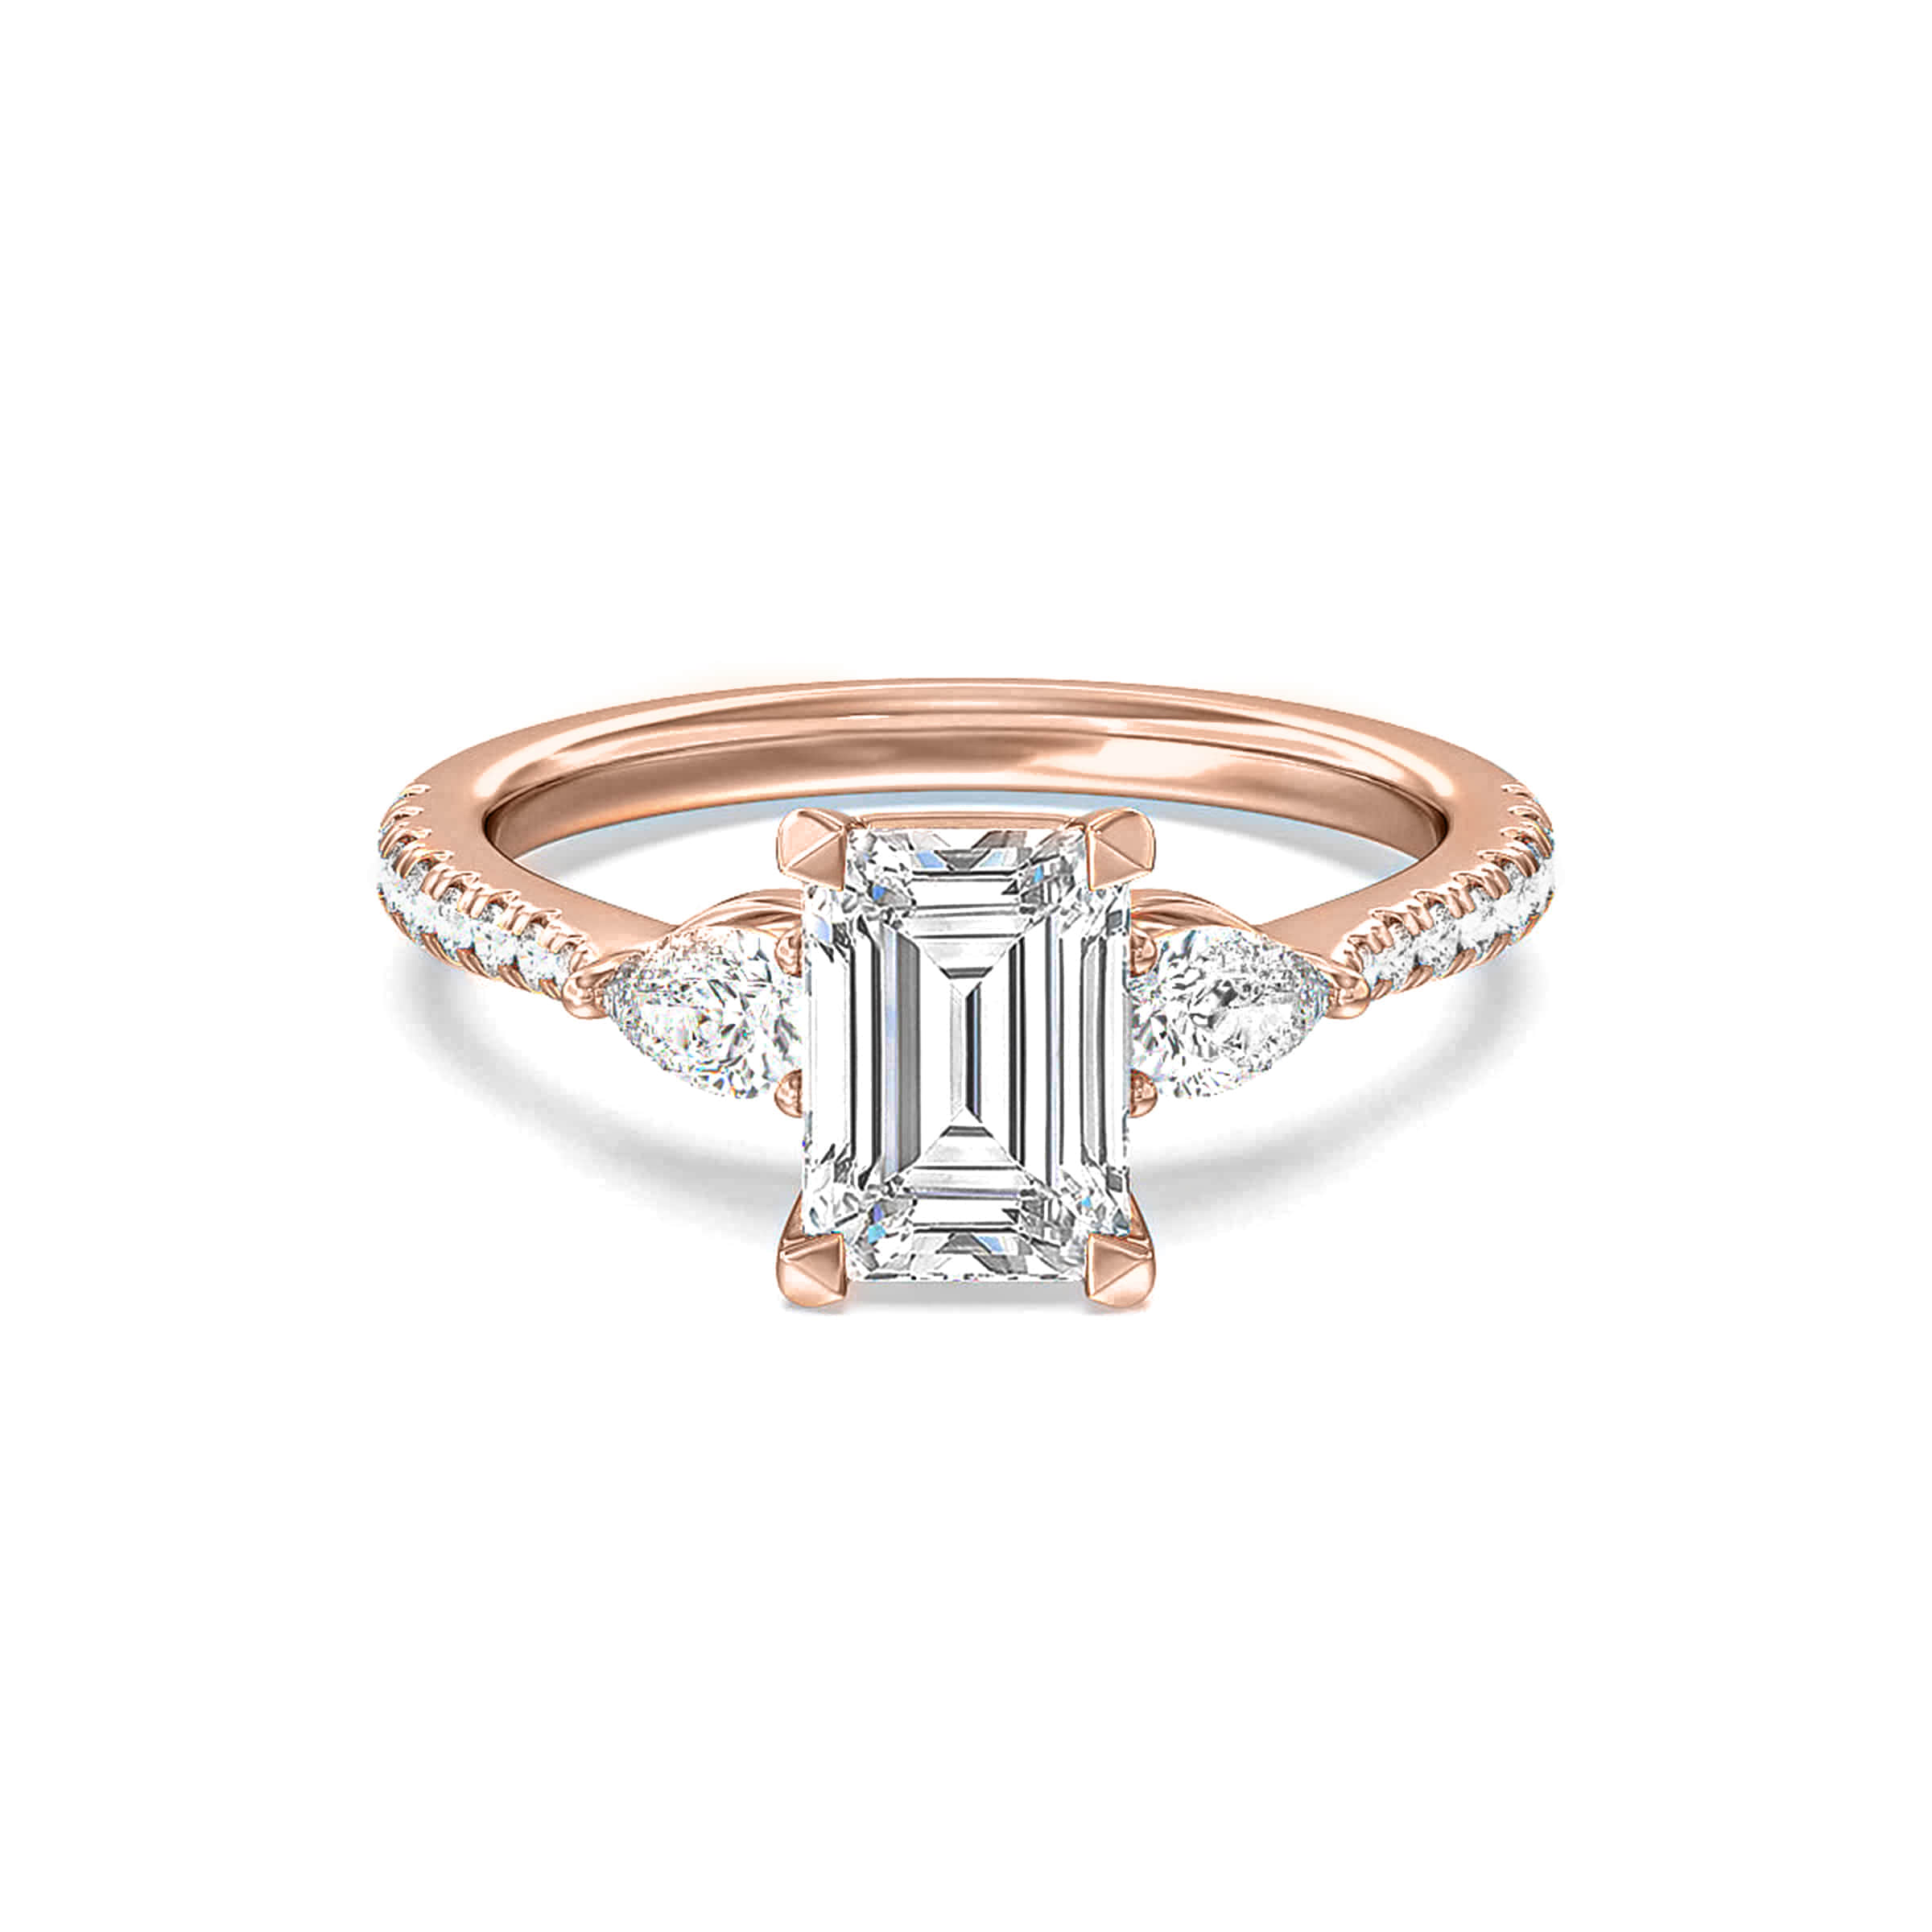 Darry Ring 3 stone emerald cut promise ring in rose gold